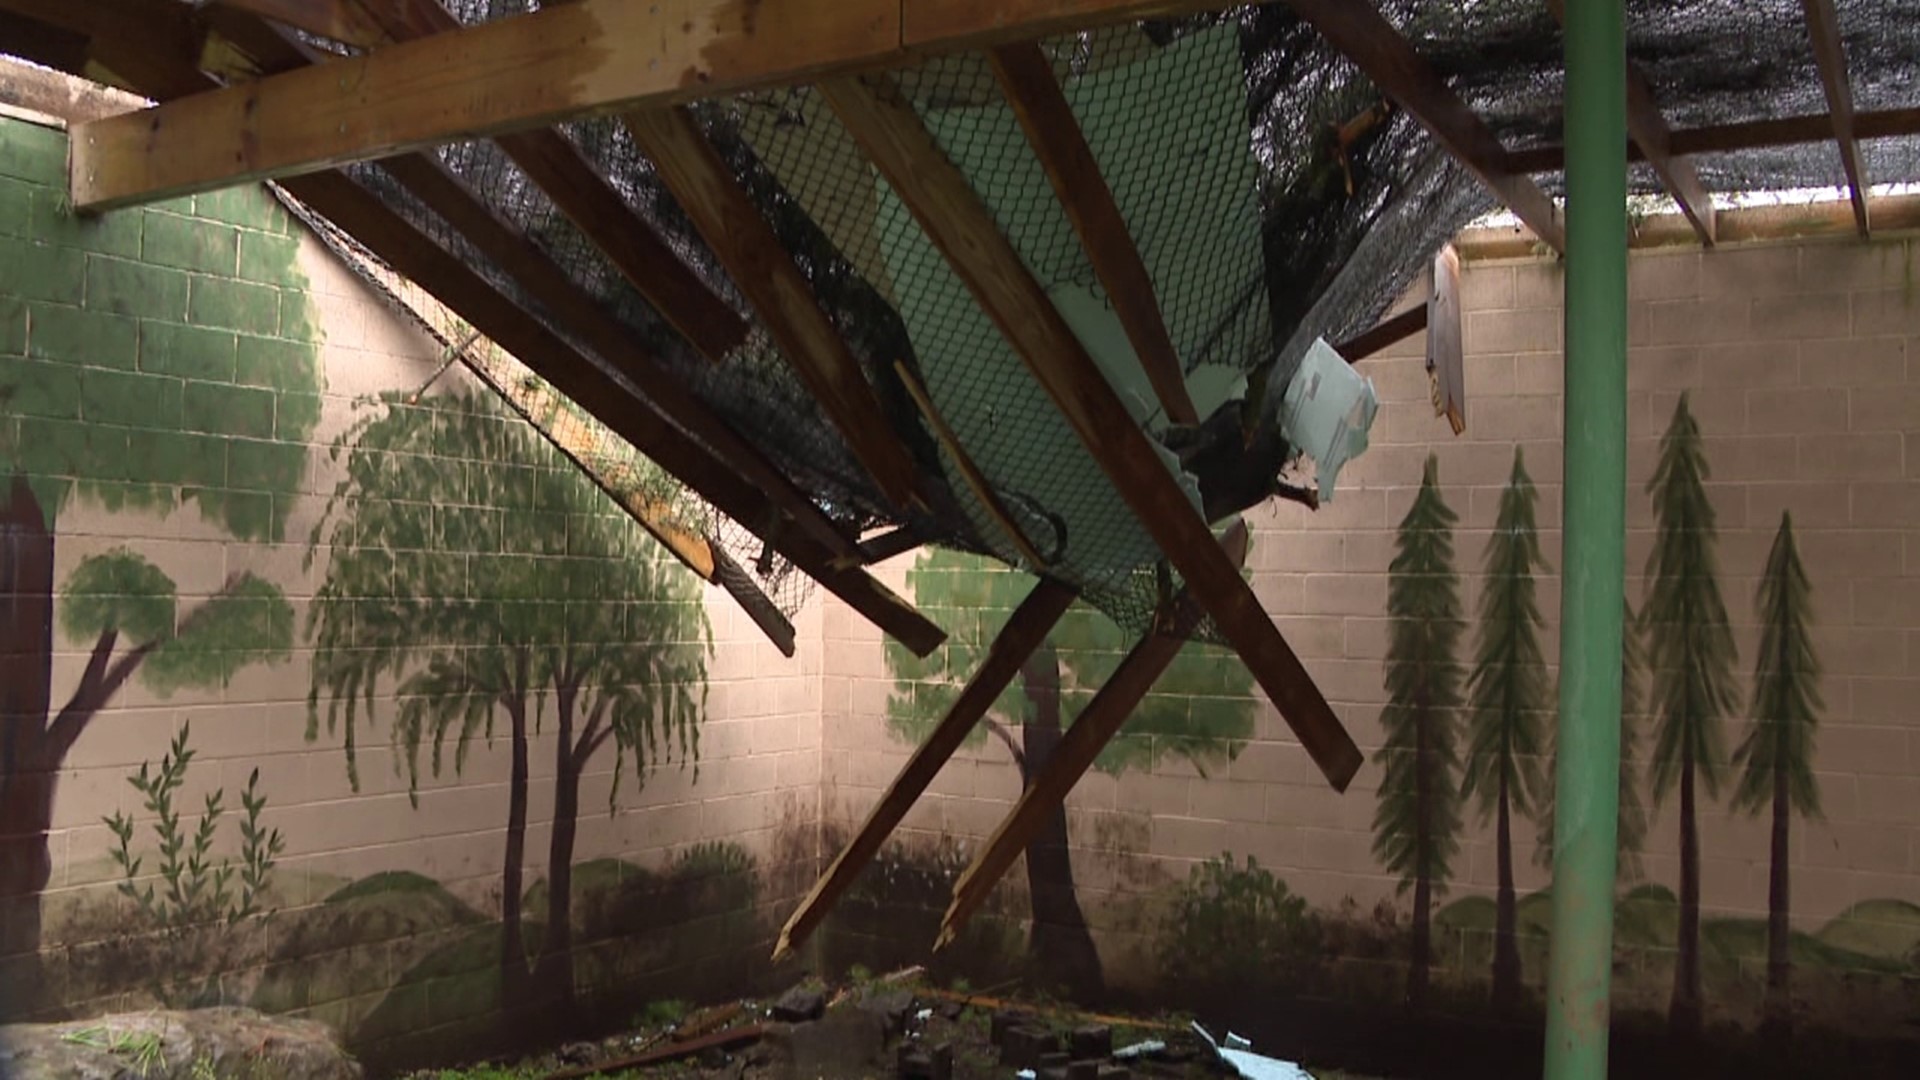 As the severe weather caused damage throughout northeastern and central Pennsylvania, a fallen tree destroyed the roof of a wildlife center in Monroe County.